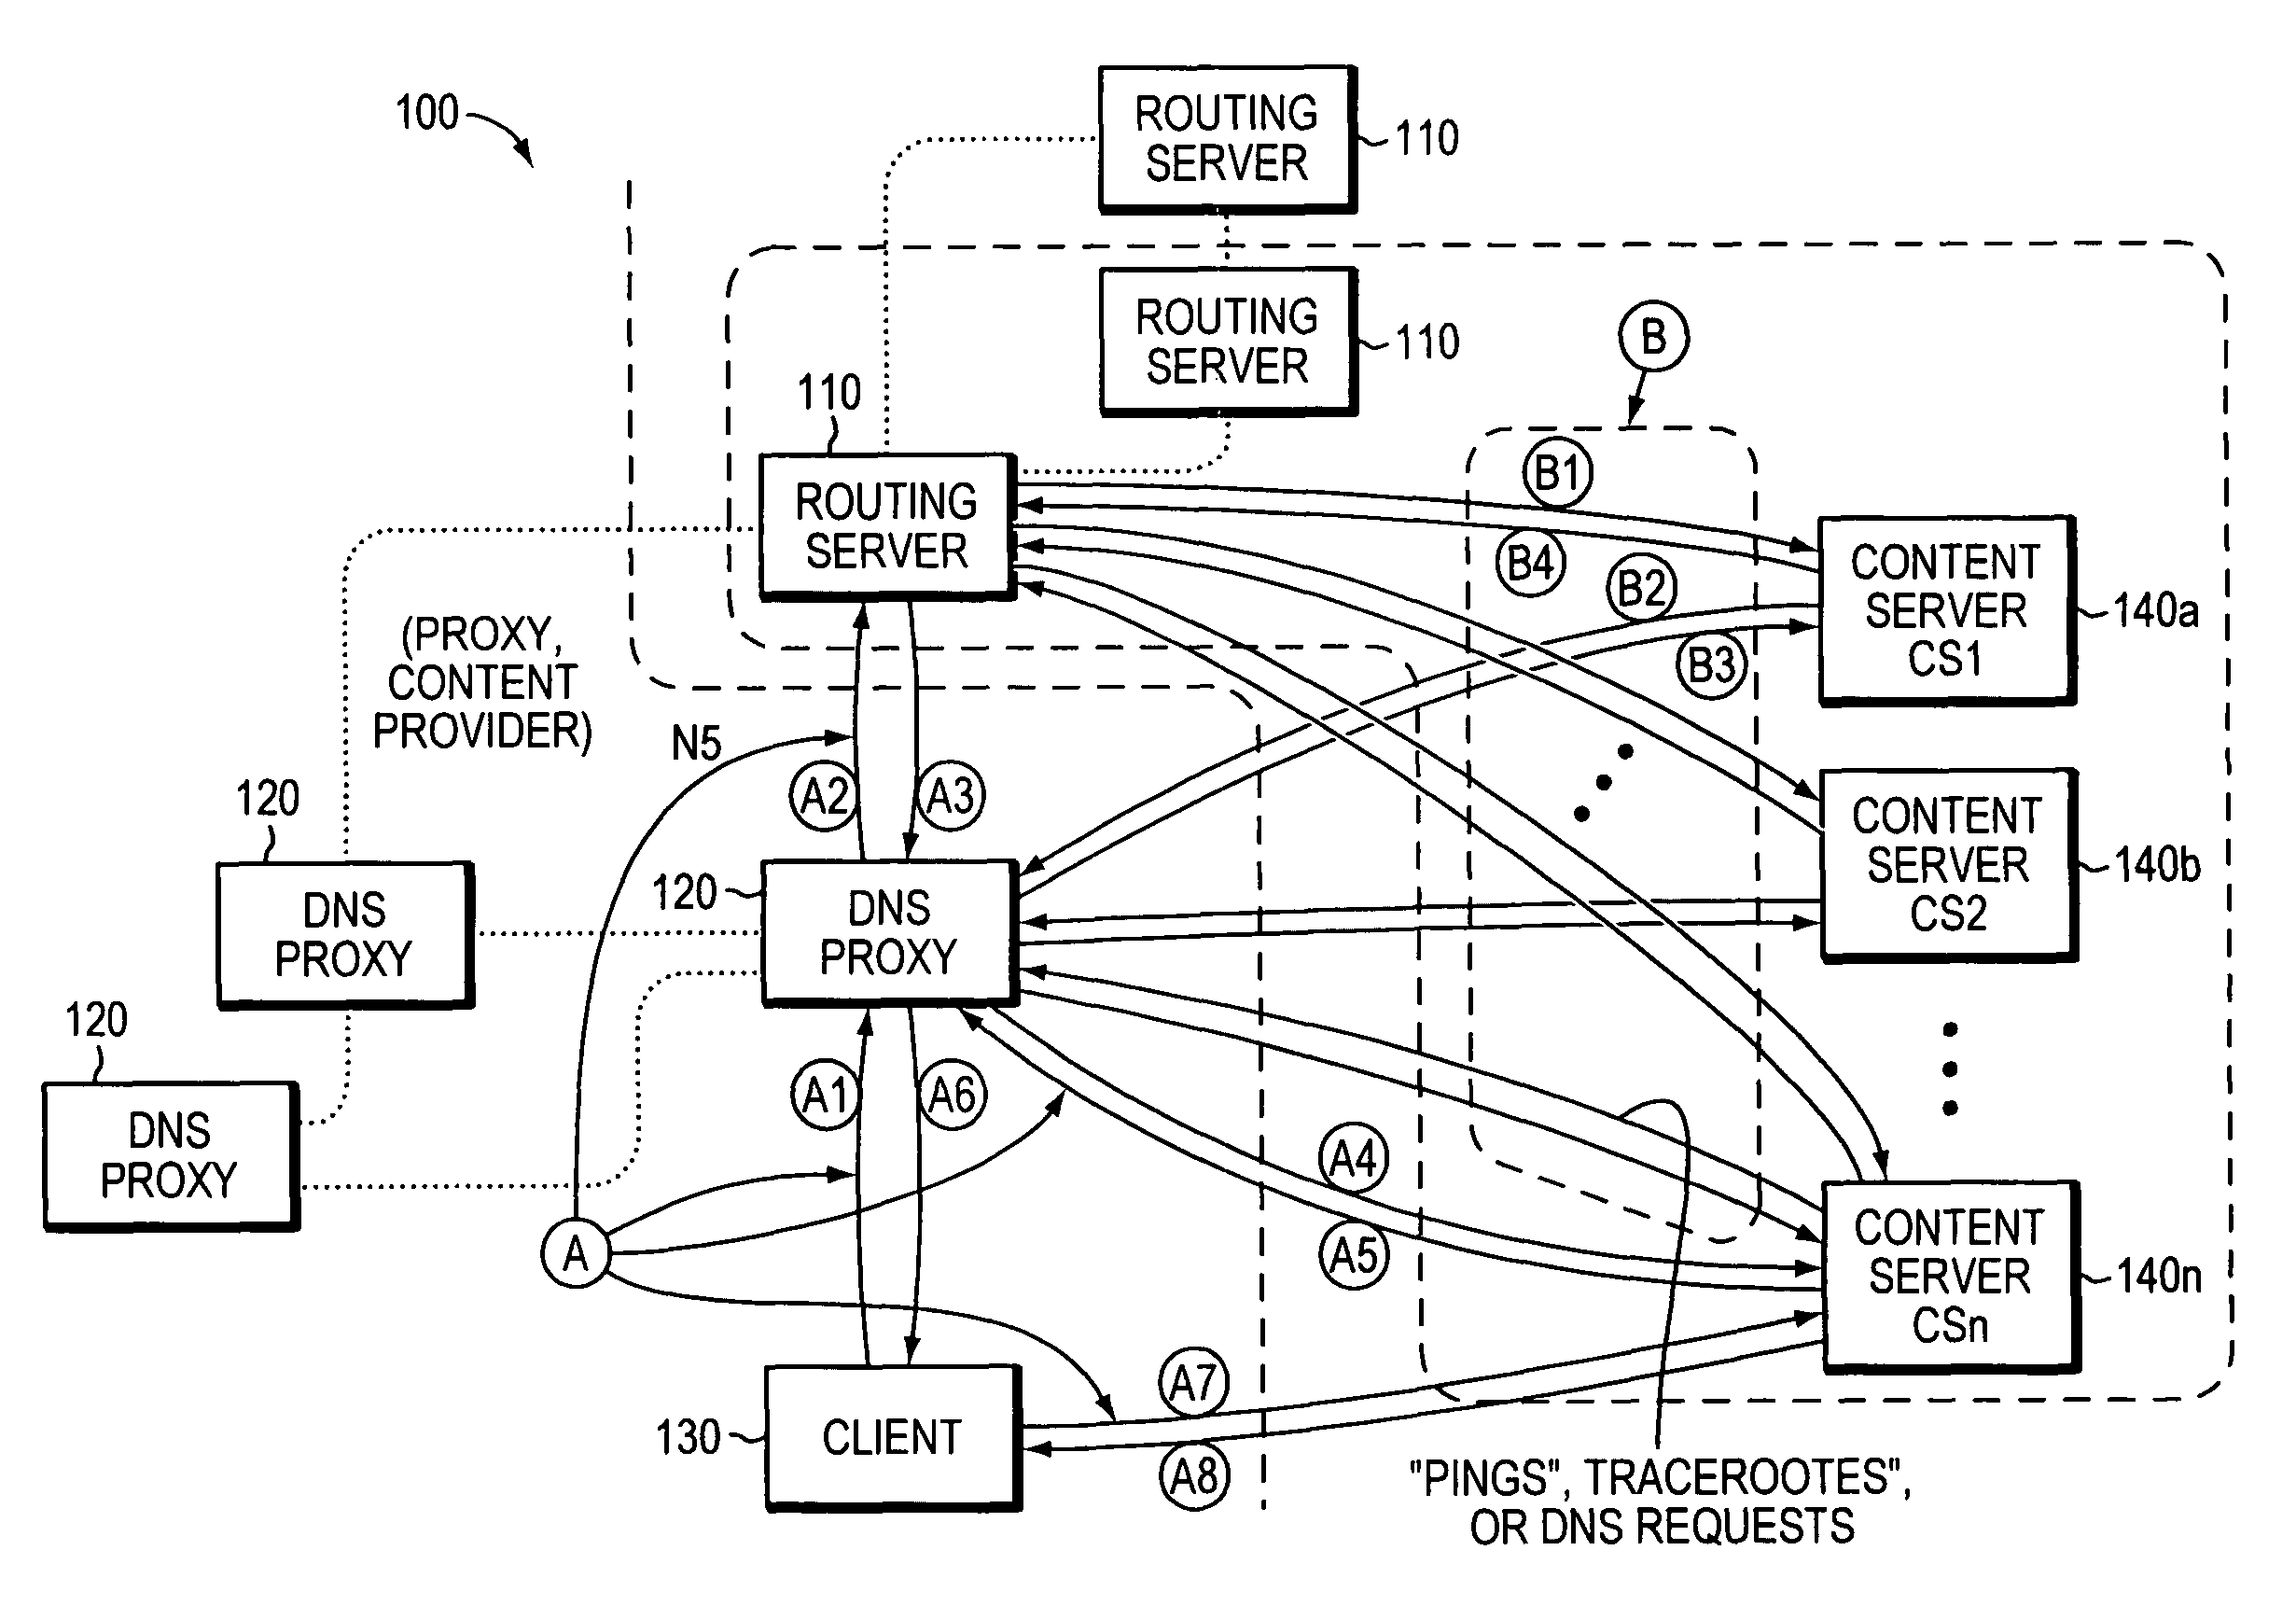 Content server selection for accessing content in a content distribution network